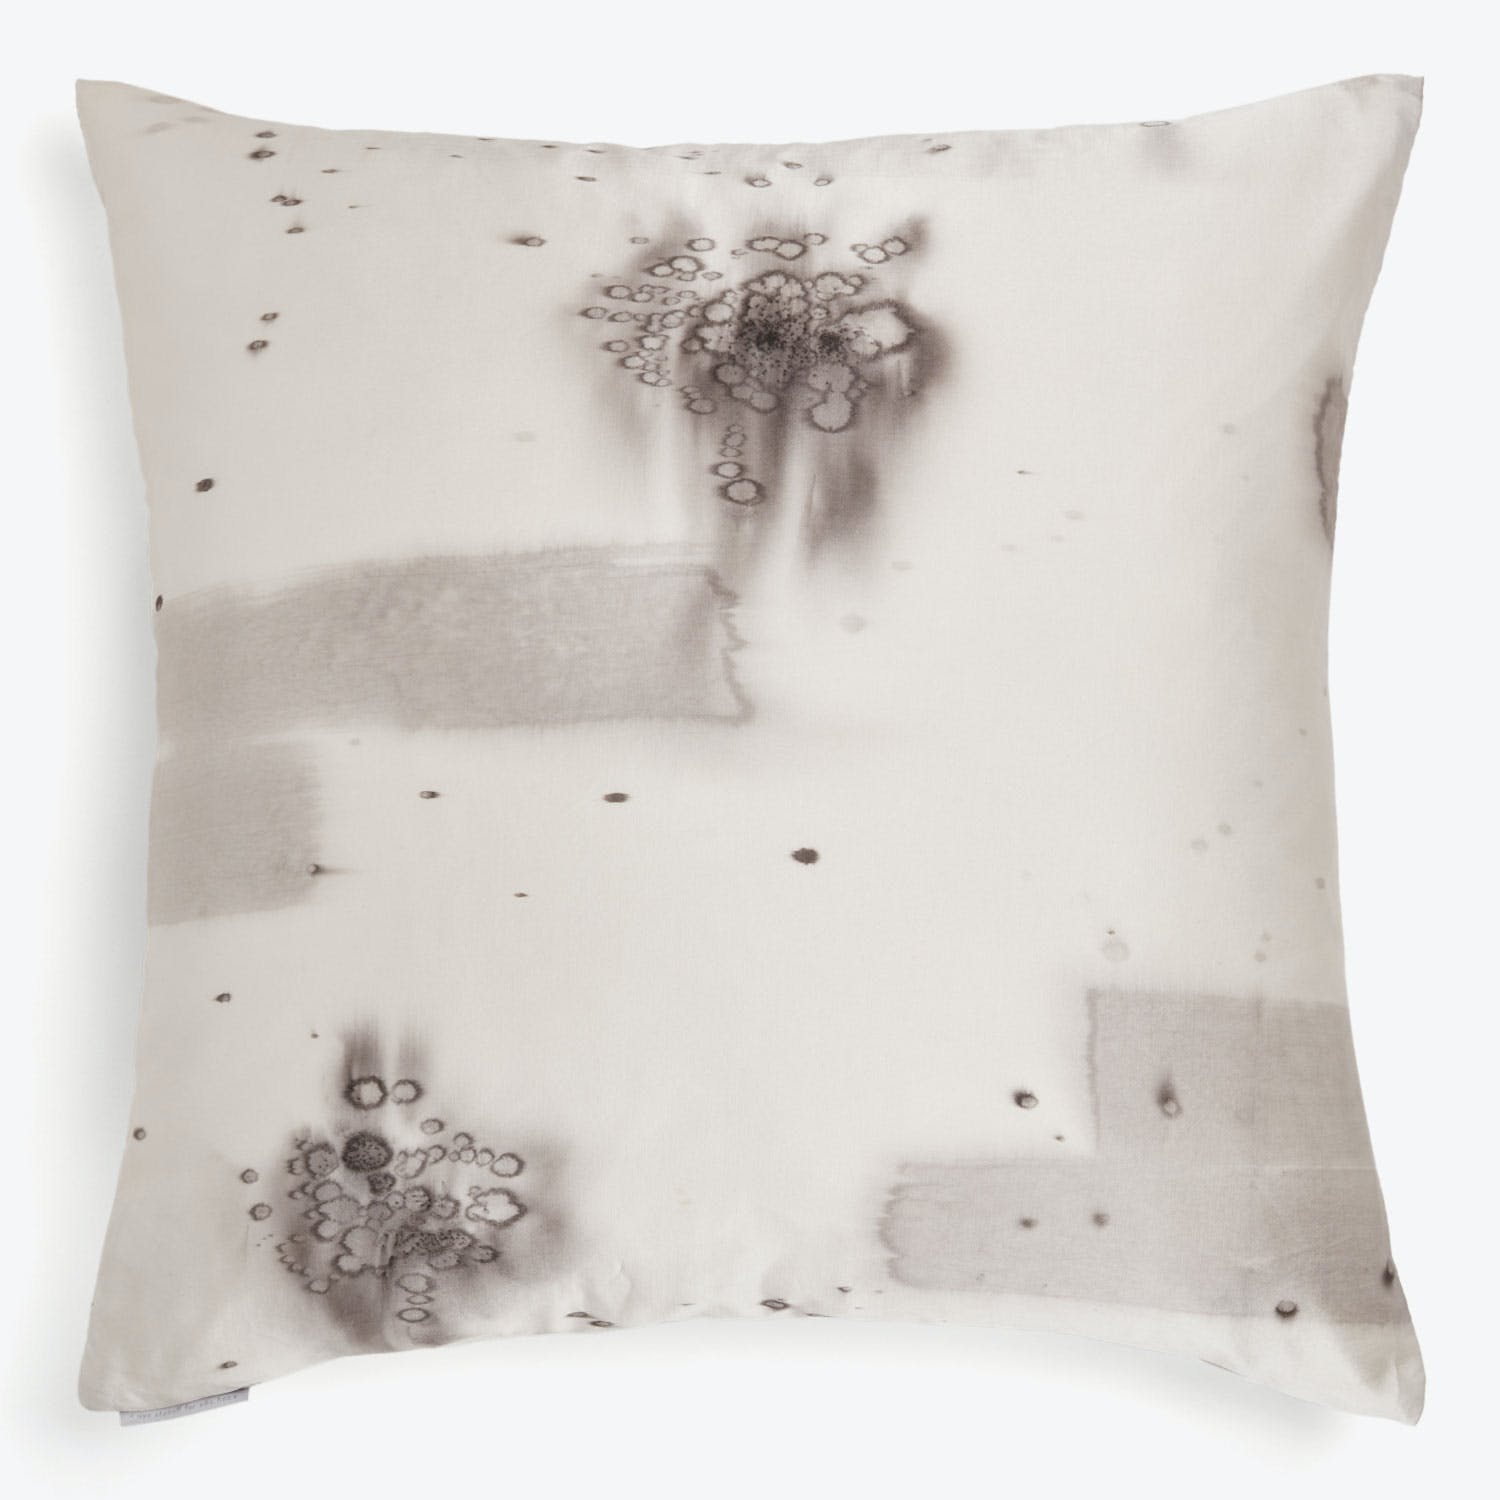 Stained pillow exhibits various patterns and sizes of dark marks.